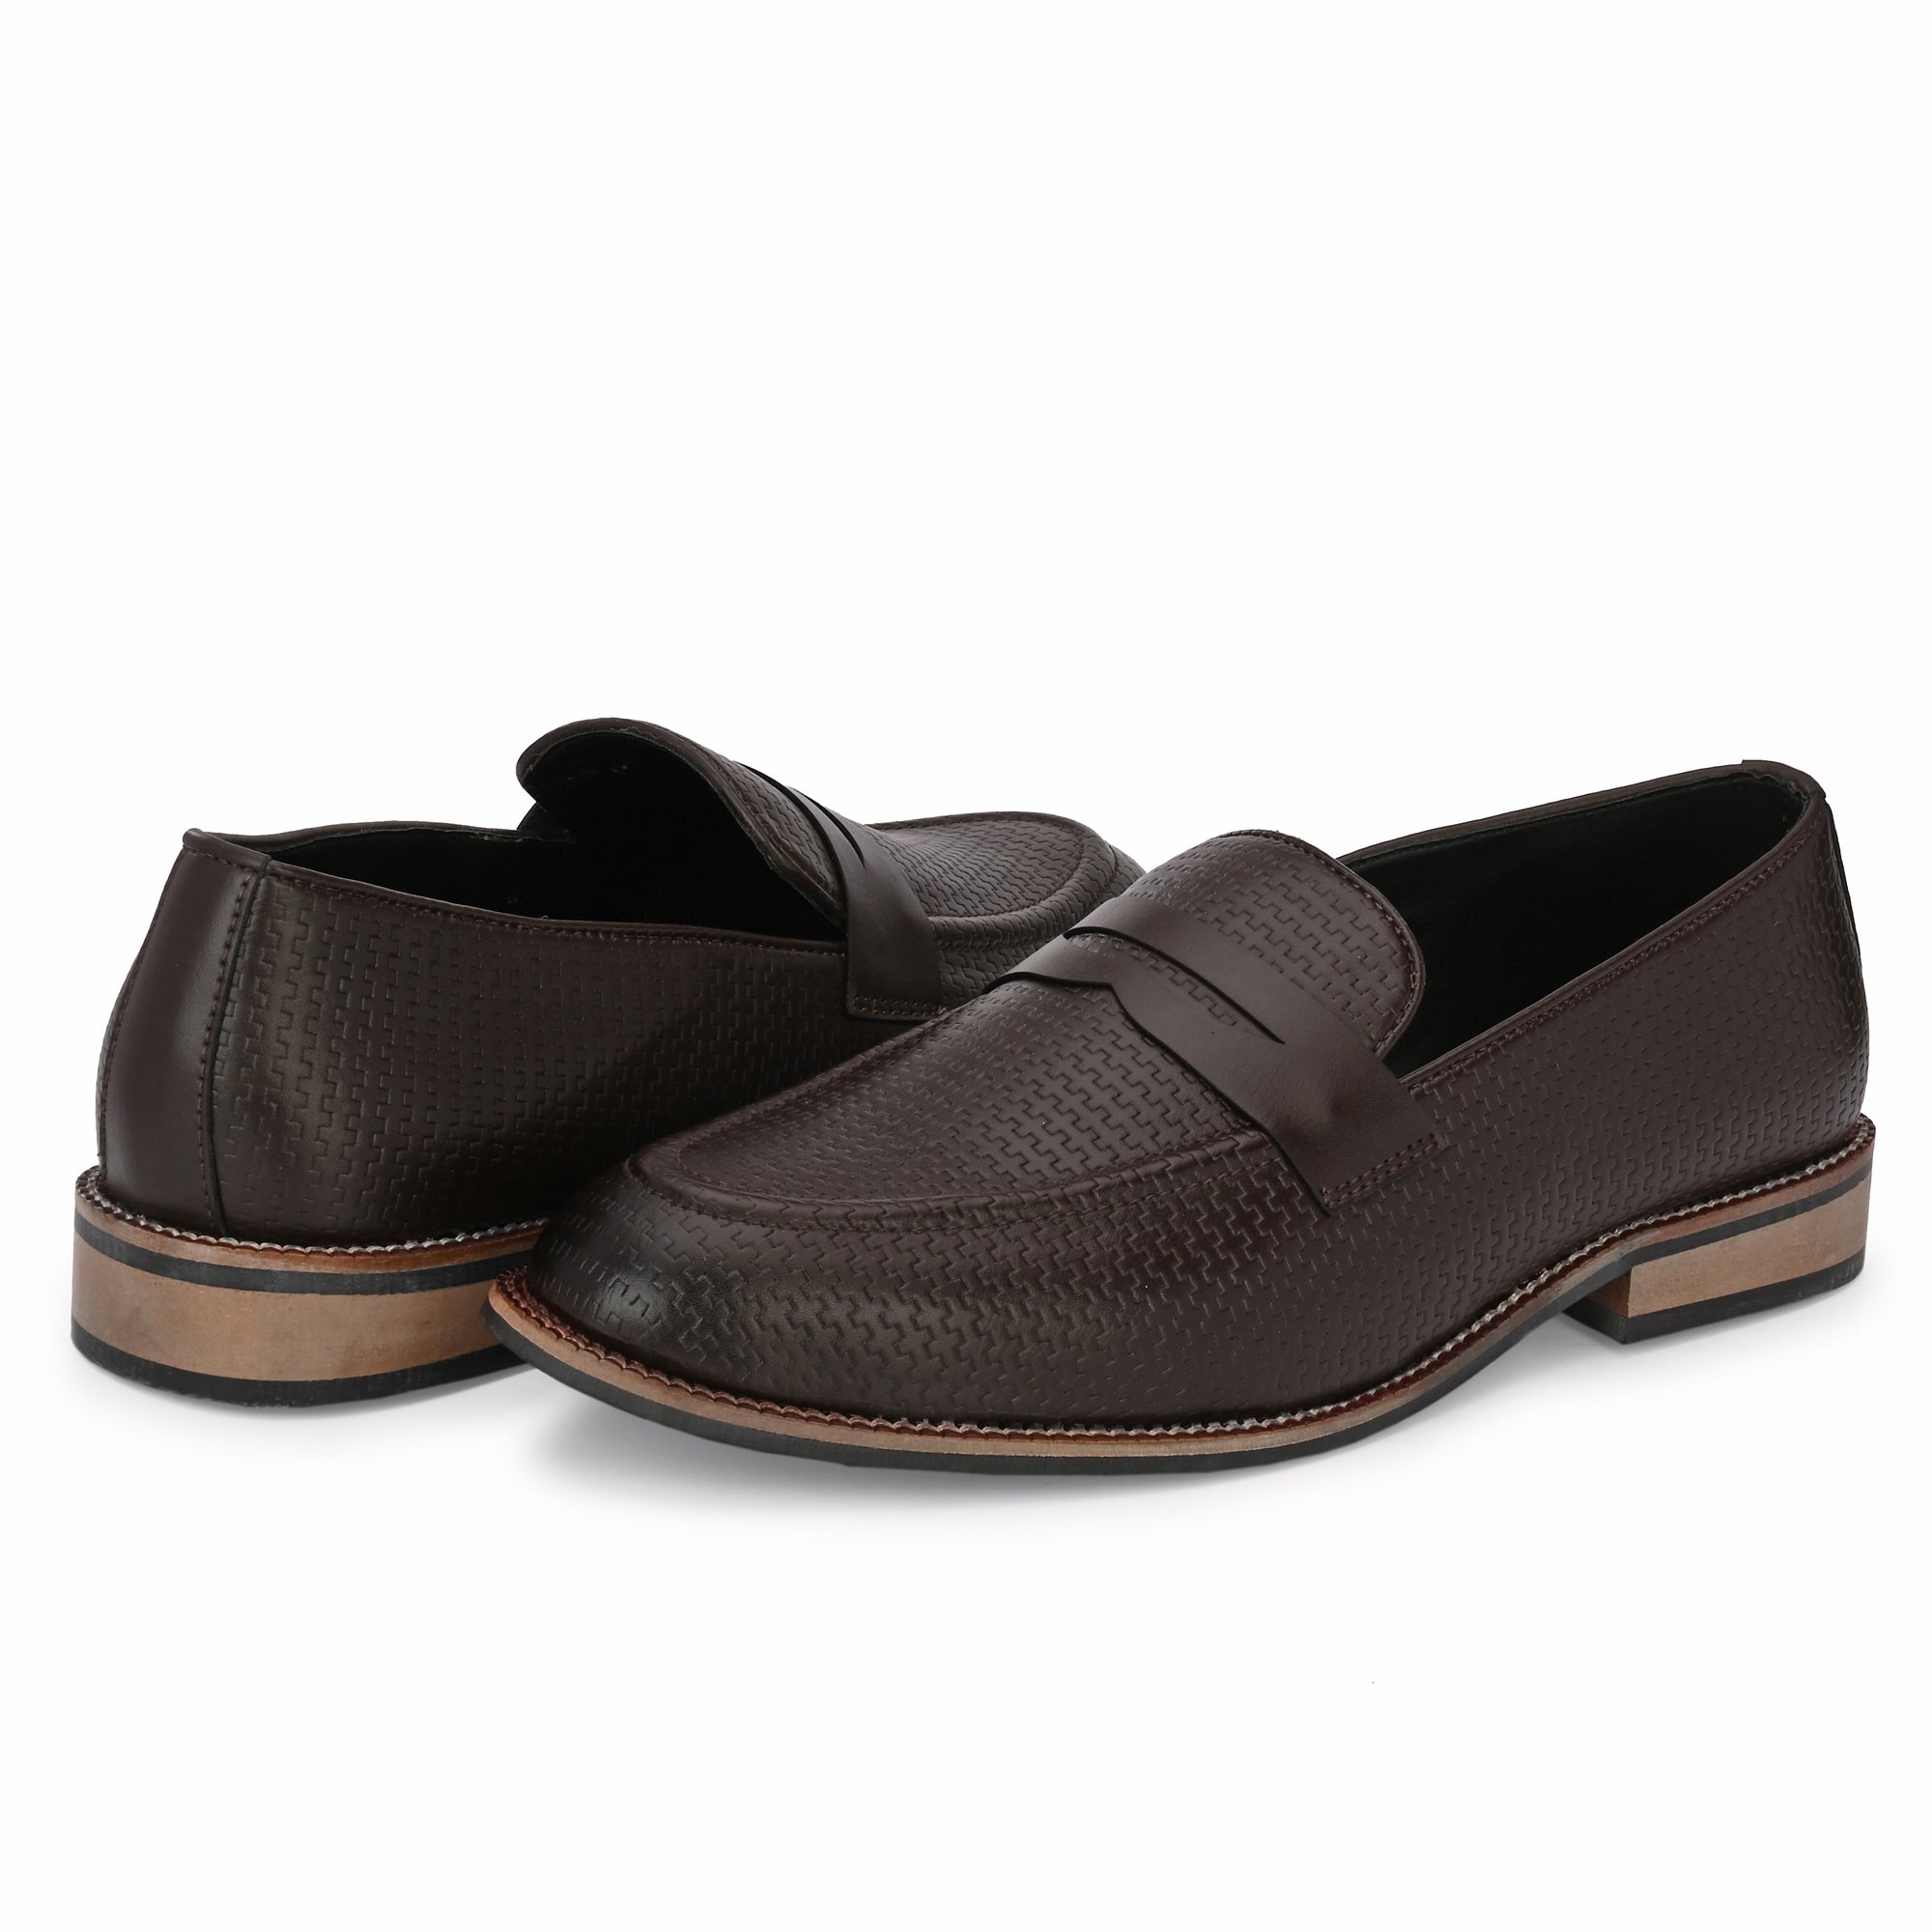 attitudist-brown-round-toe-textured-apron-loafers-for-men